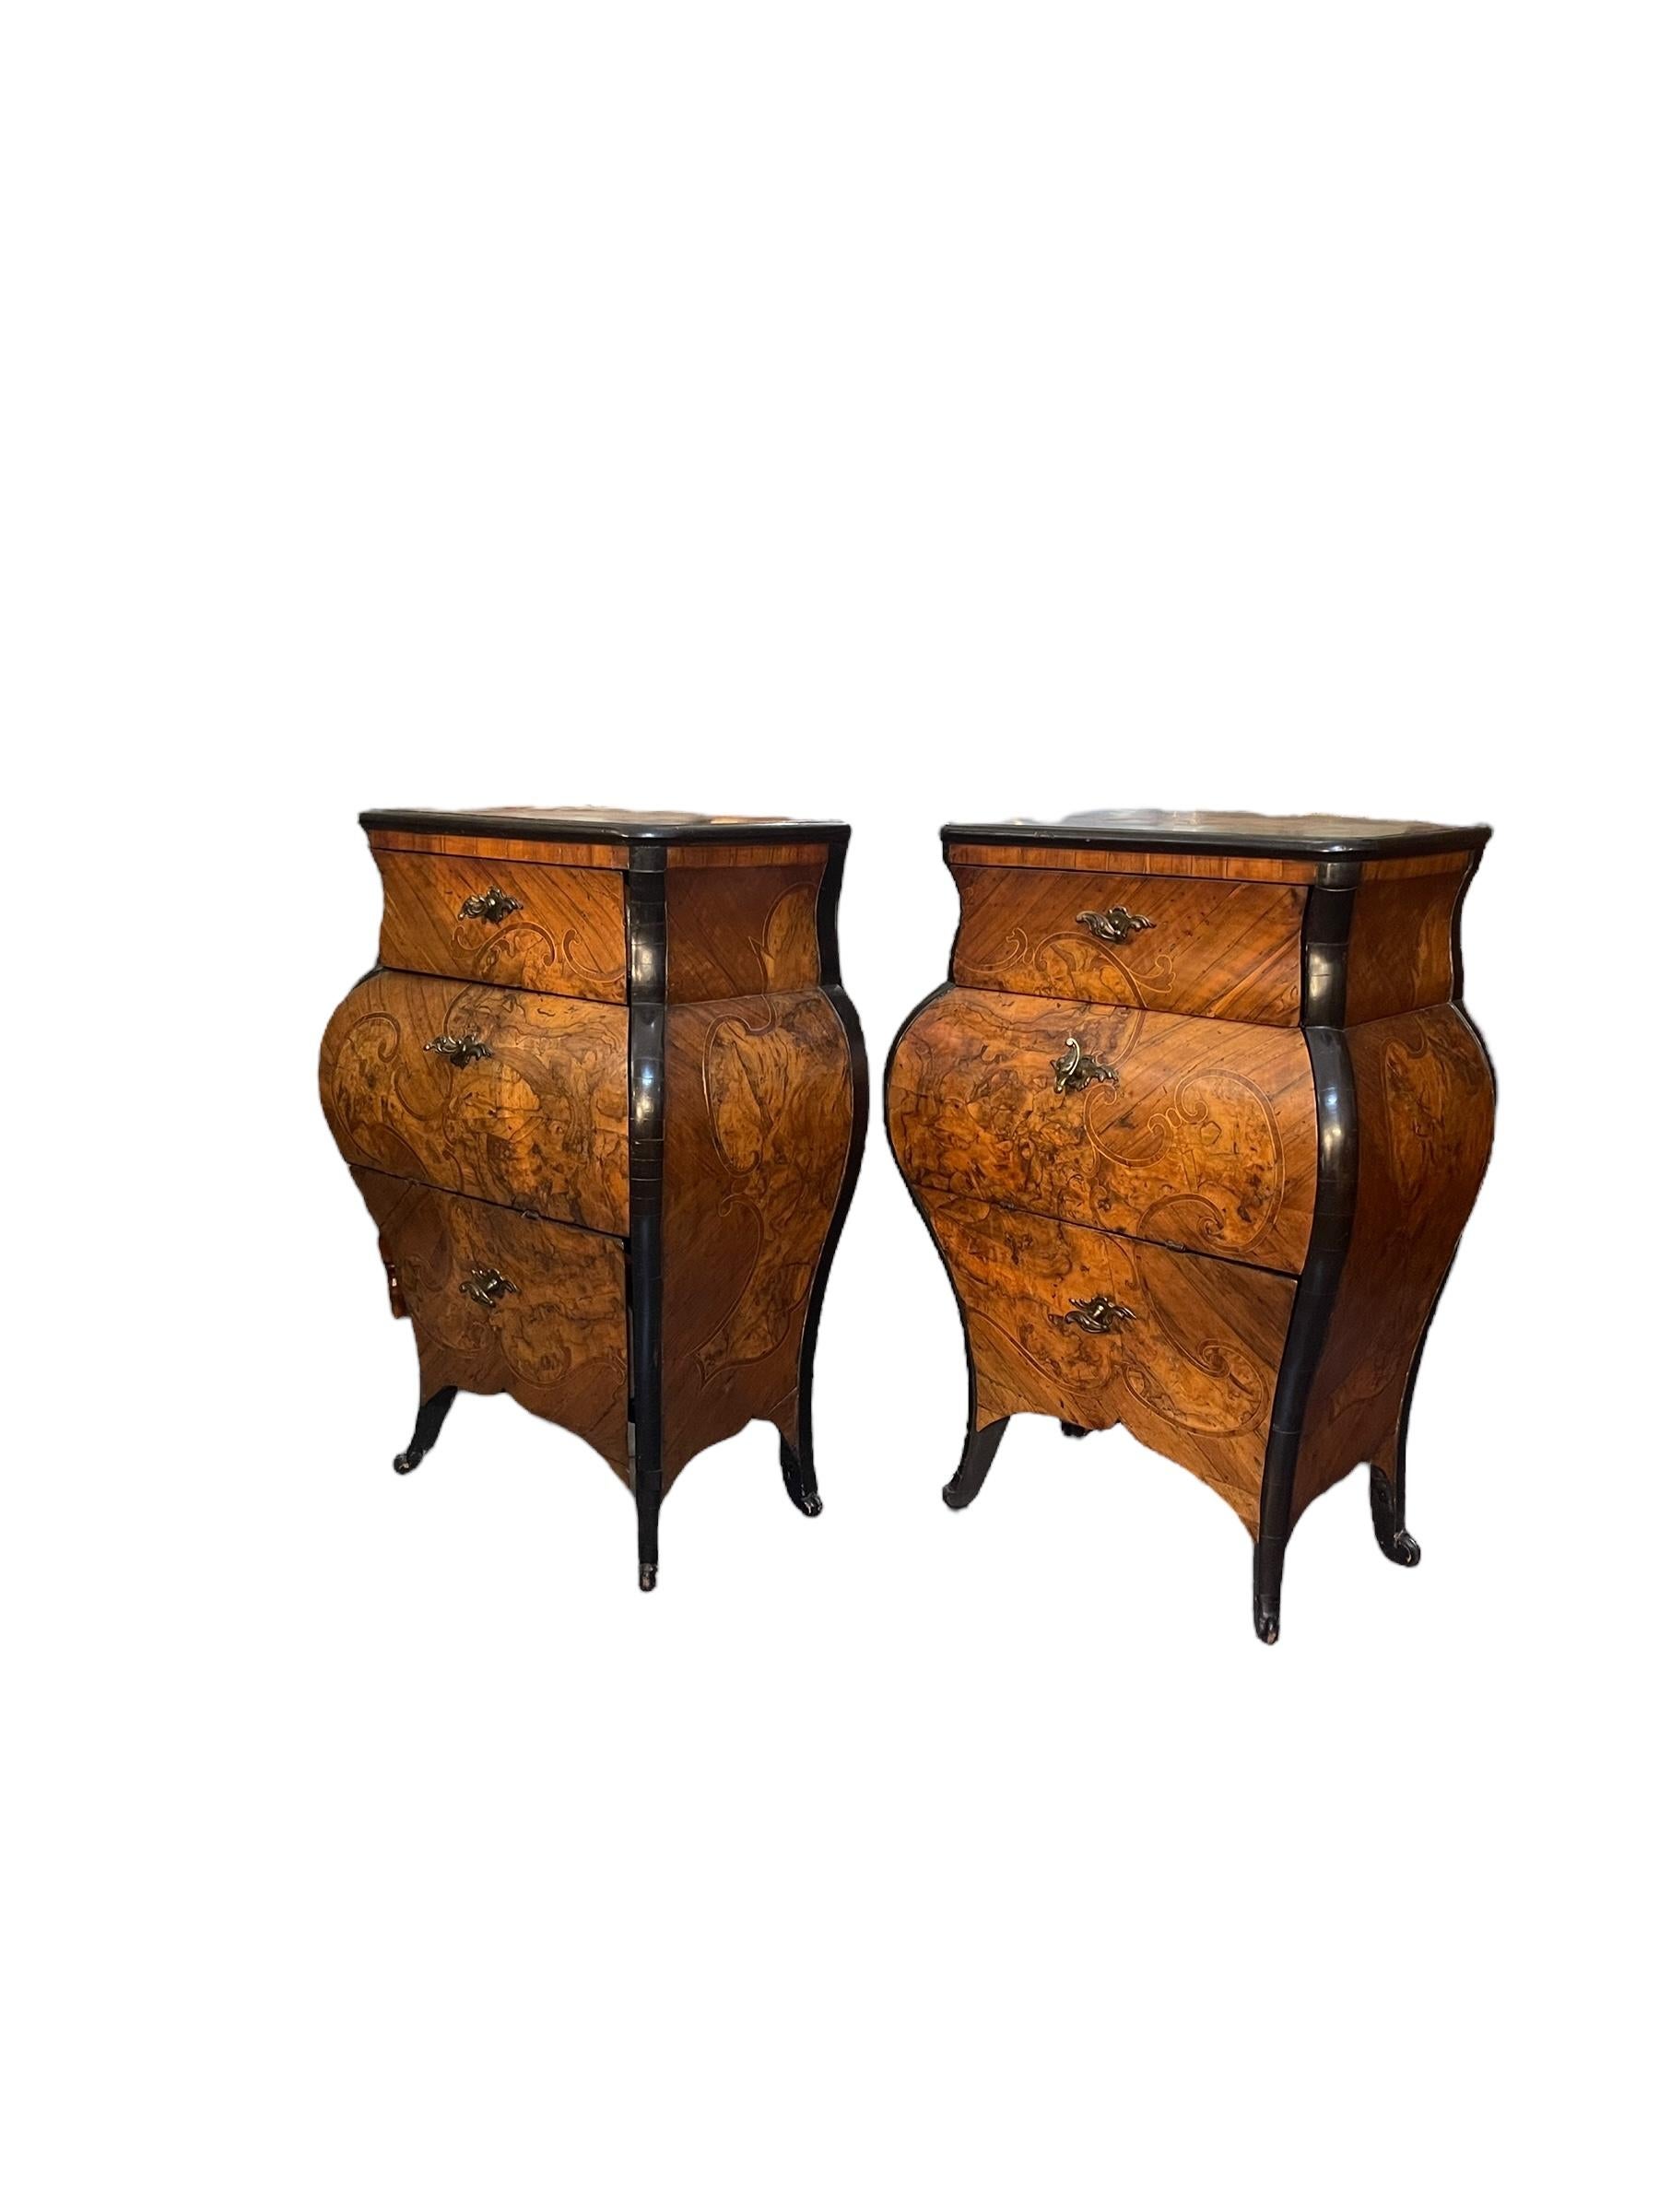 Pair of Louis XV Lombard bedside tables, veneered in walnut and briar, moved on the front and sides, ebonized profiles, three drawers, one of which is folding.

The walnut briar forms a complementary decoration of the two pieces of furniture, both